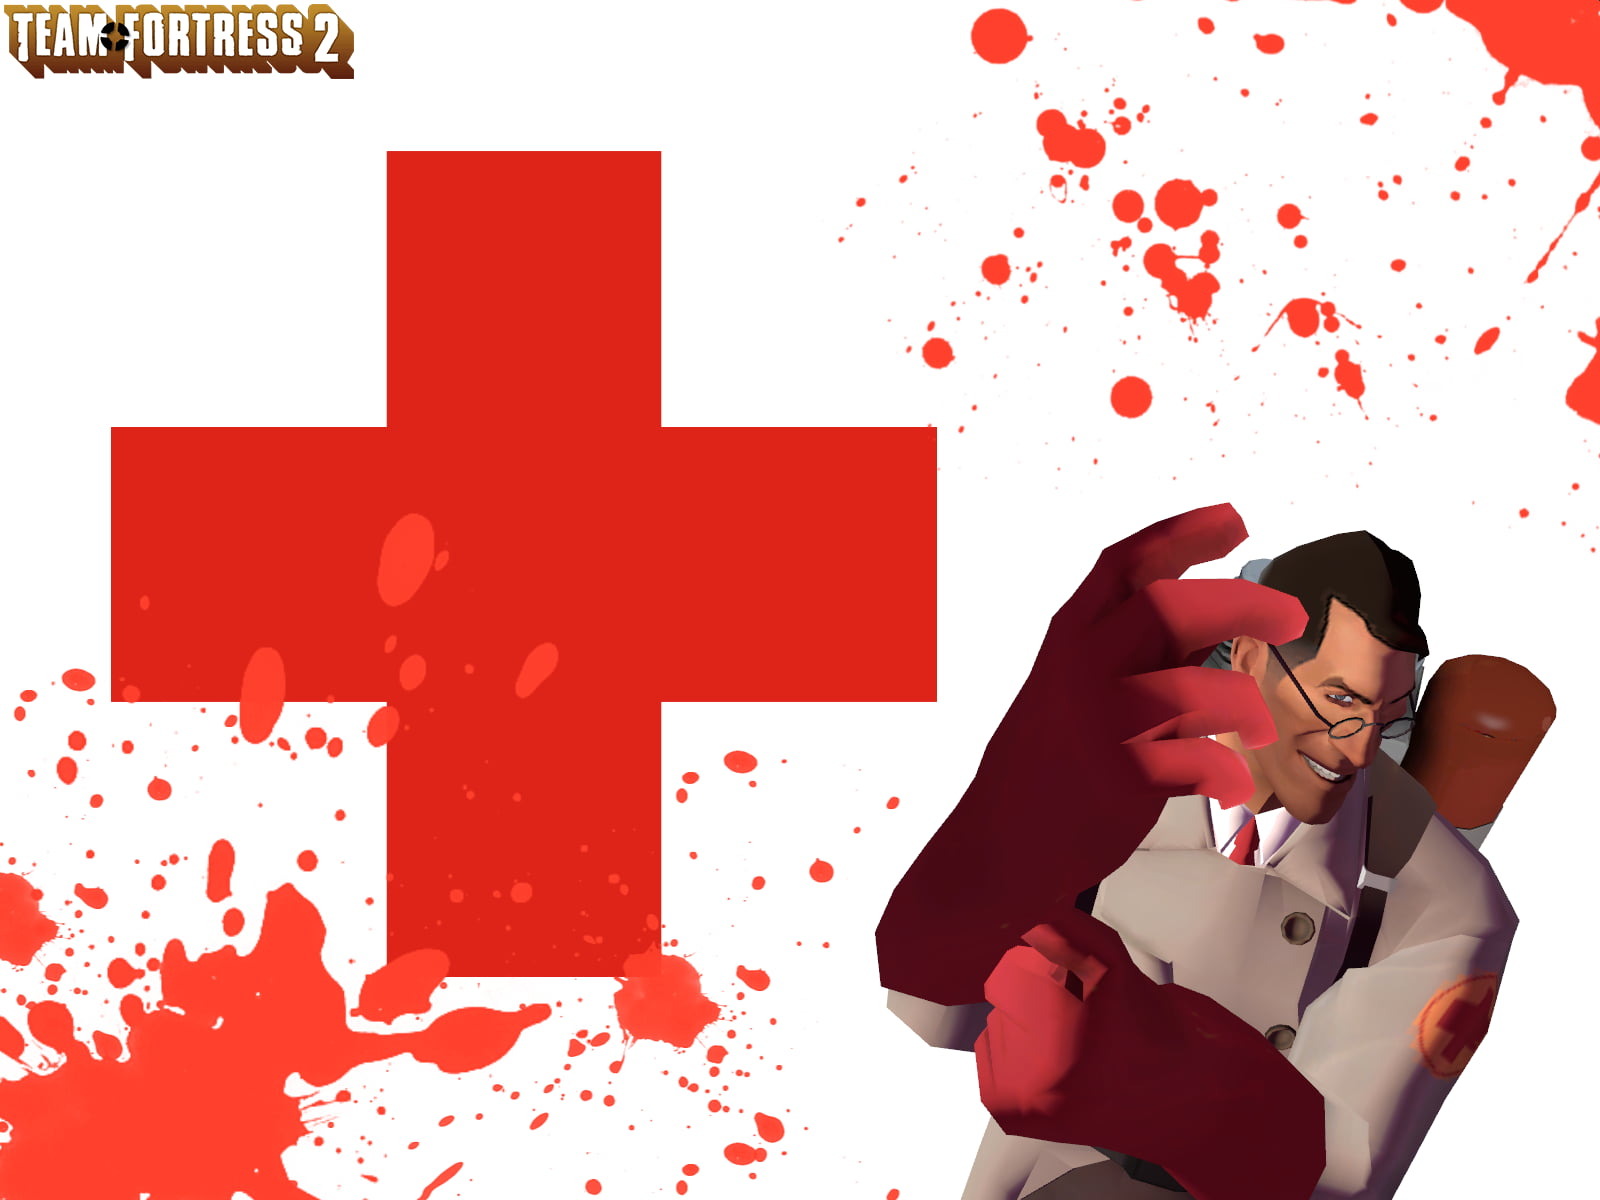 Team Fortress 2 game screenshot, video games, Team Fortress 2, Medic, blood